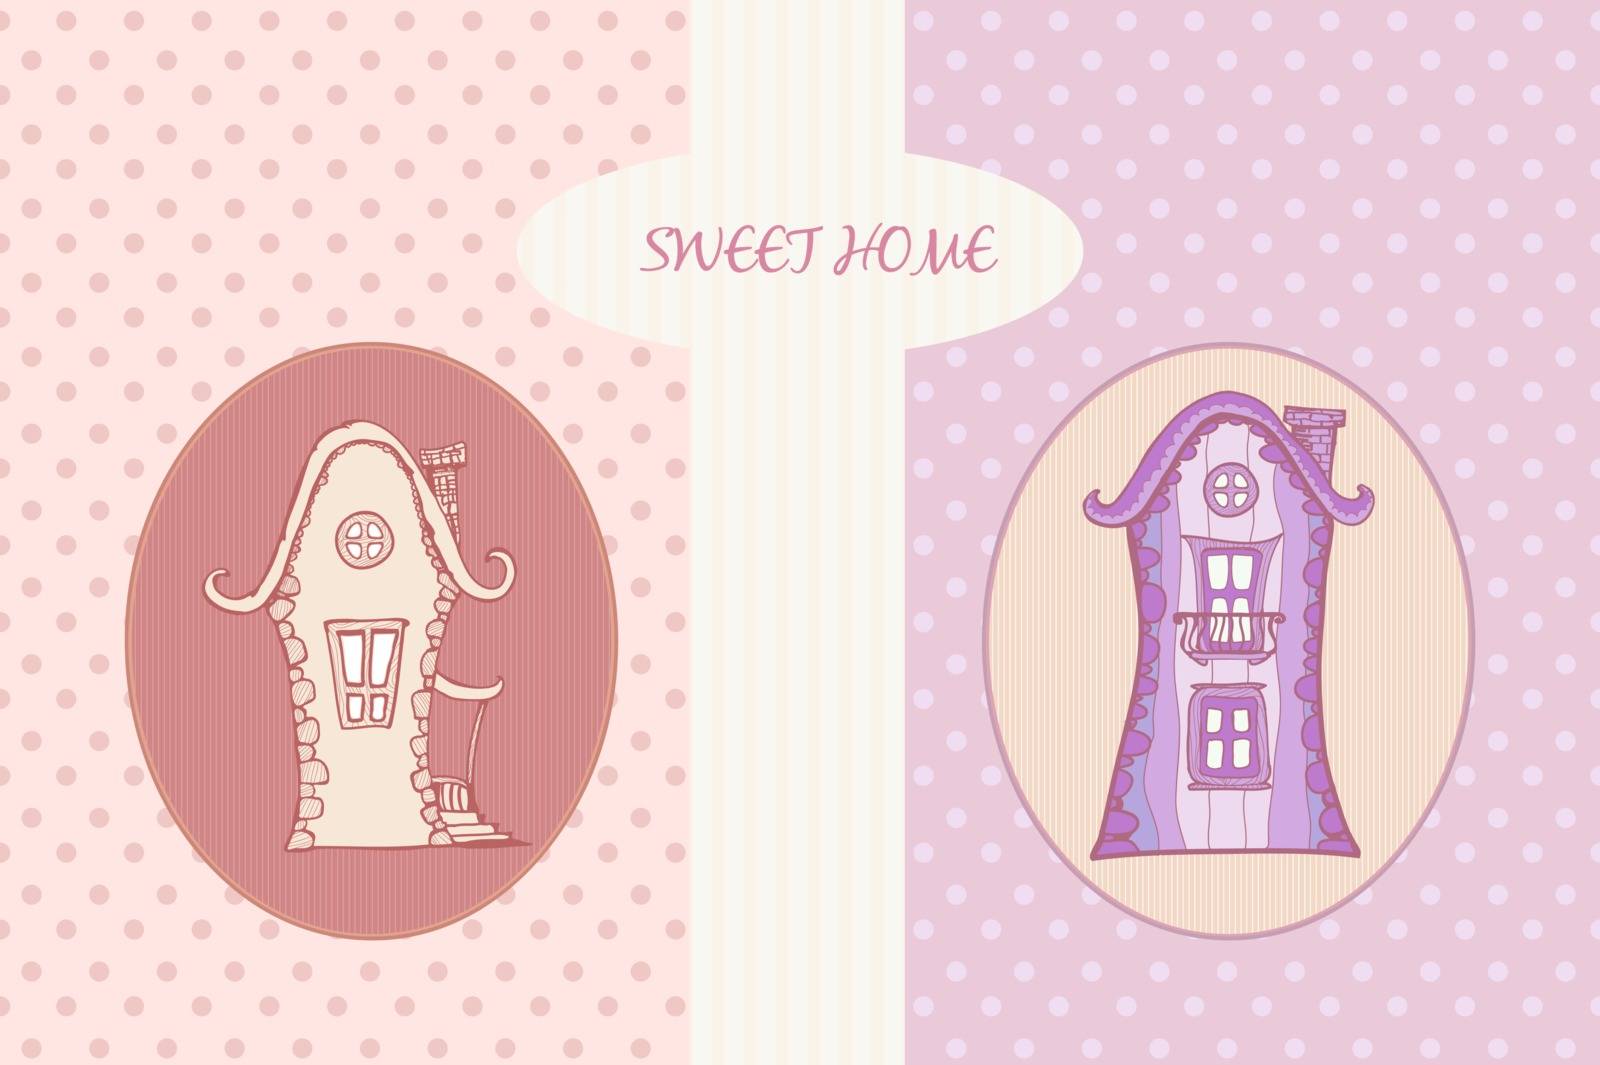 Two houses, two variants of sweet home